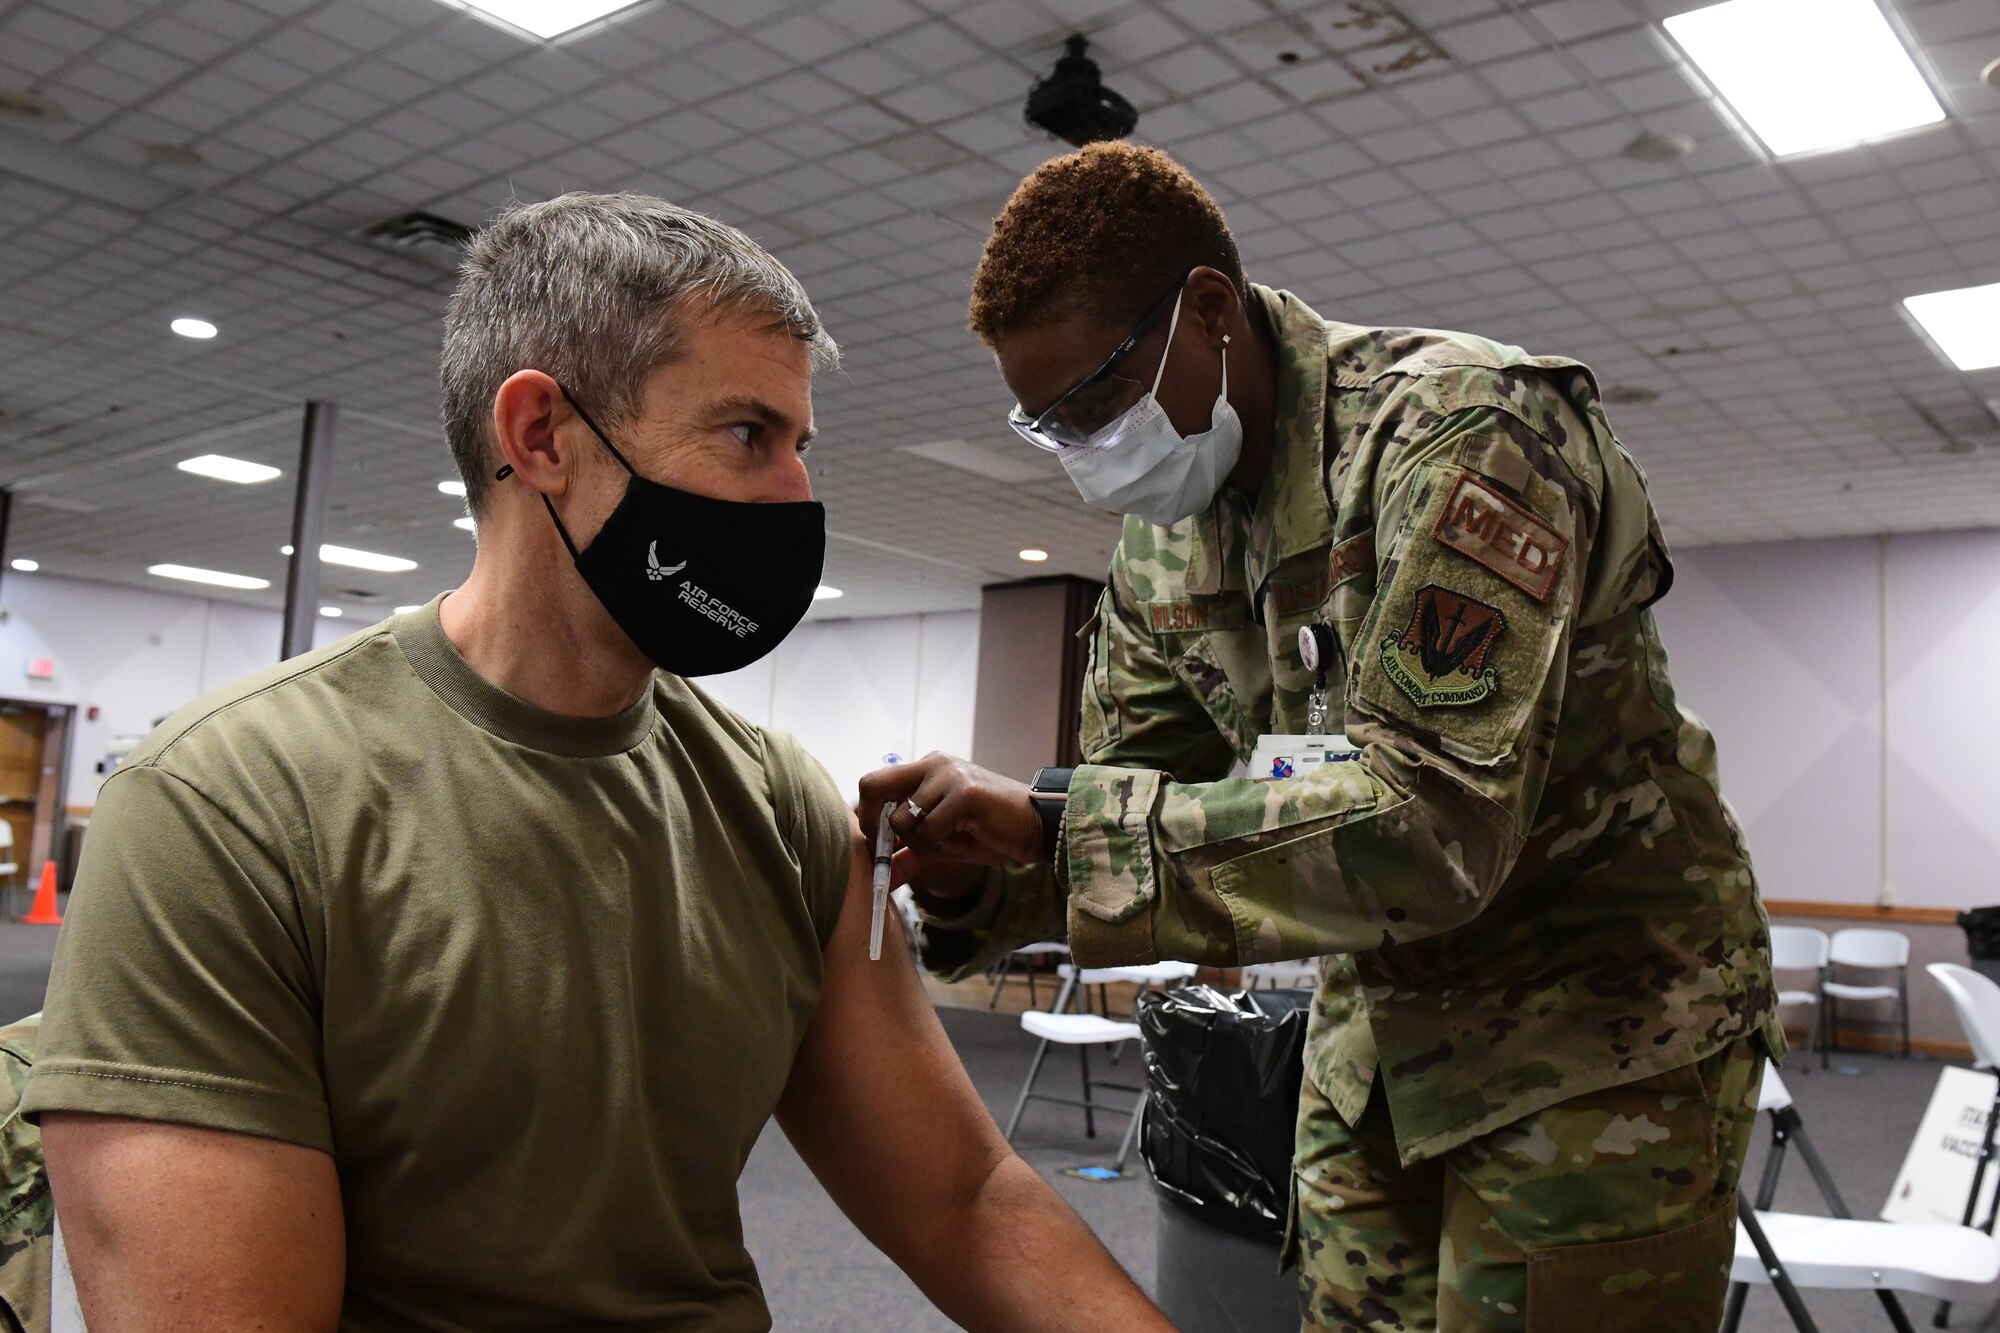 Col. Sean Carpenter, 926th Wing commander, received his COVID-19 vaccine during the Unit Training Assembly, Jan. 9, at Nellis Air Force Base, Nevada. (U.S. Air Force Photo by Staff Sgt. Lorna Booze)